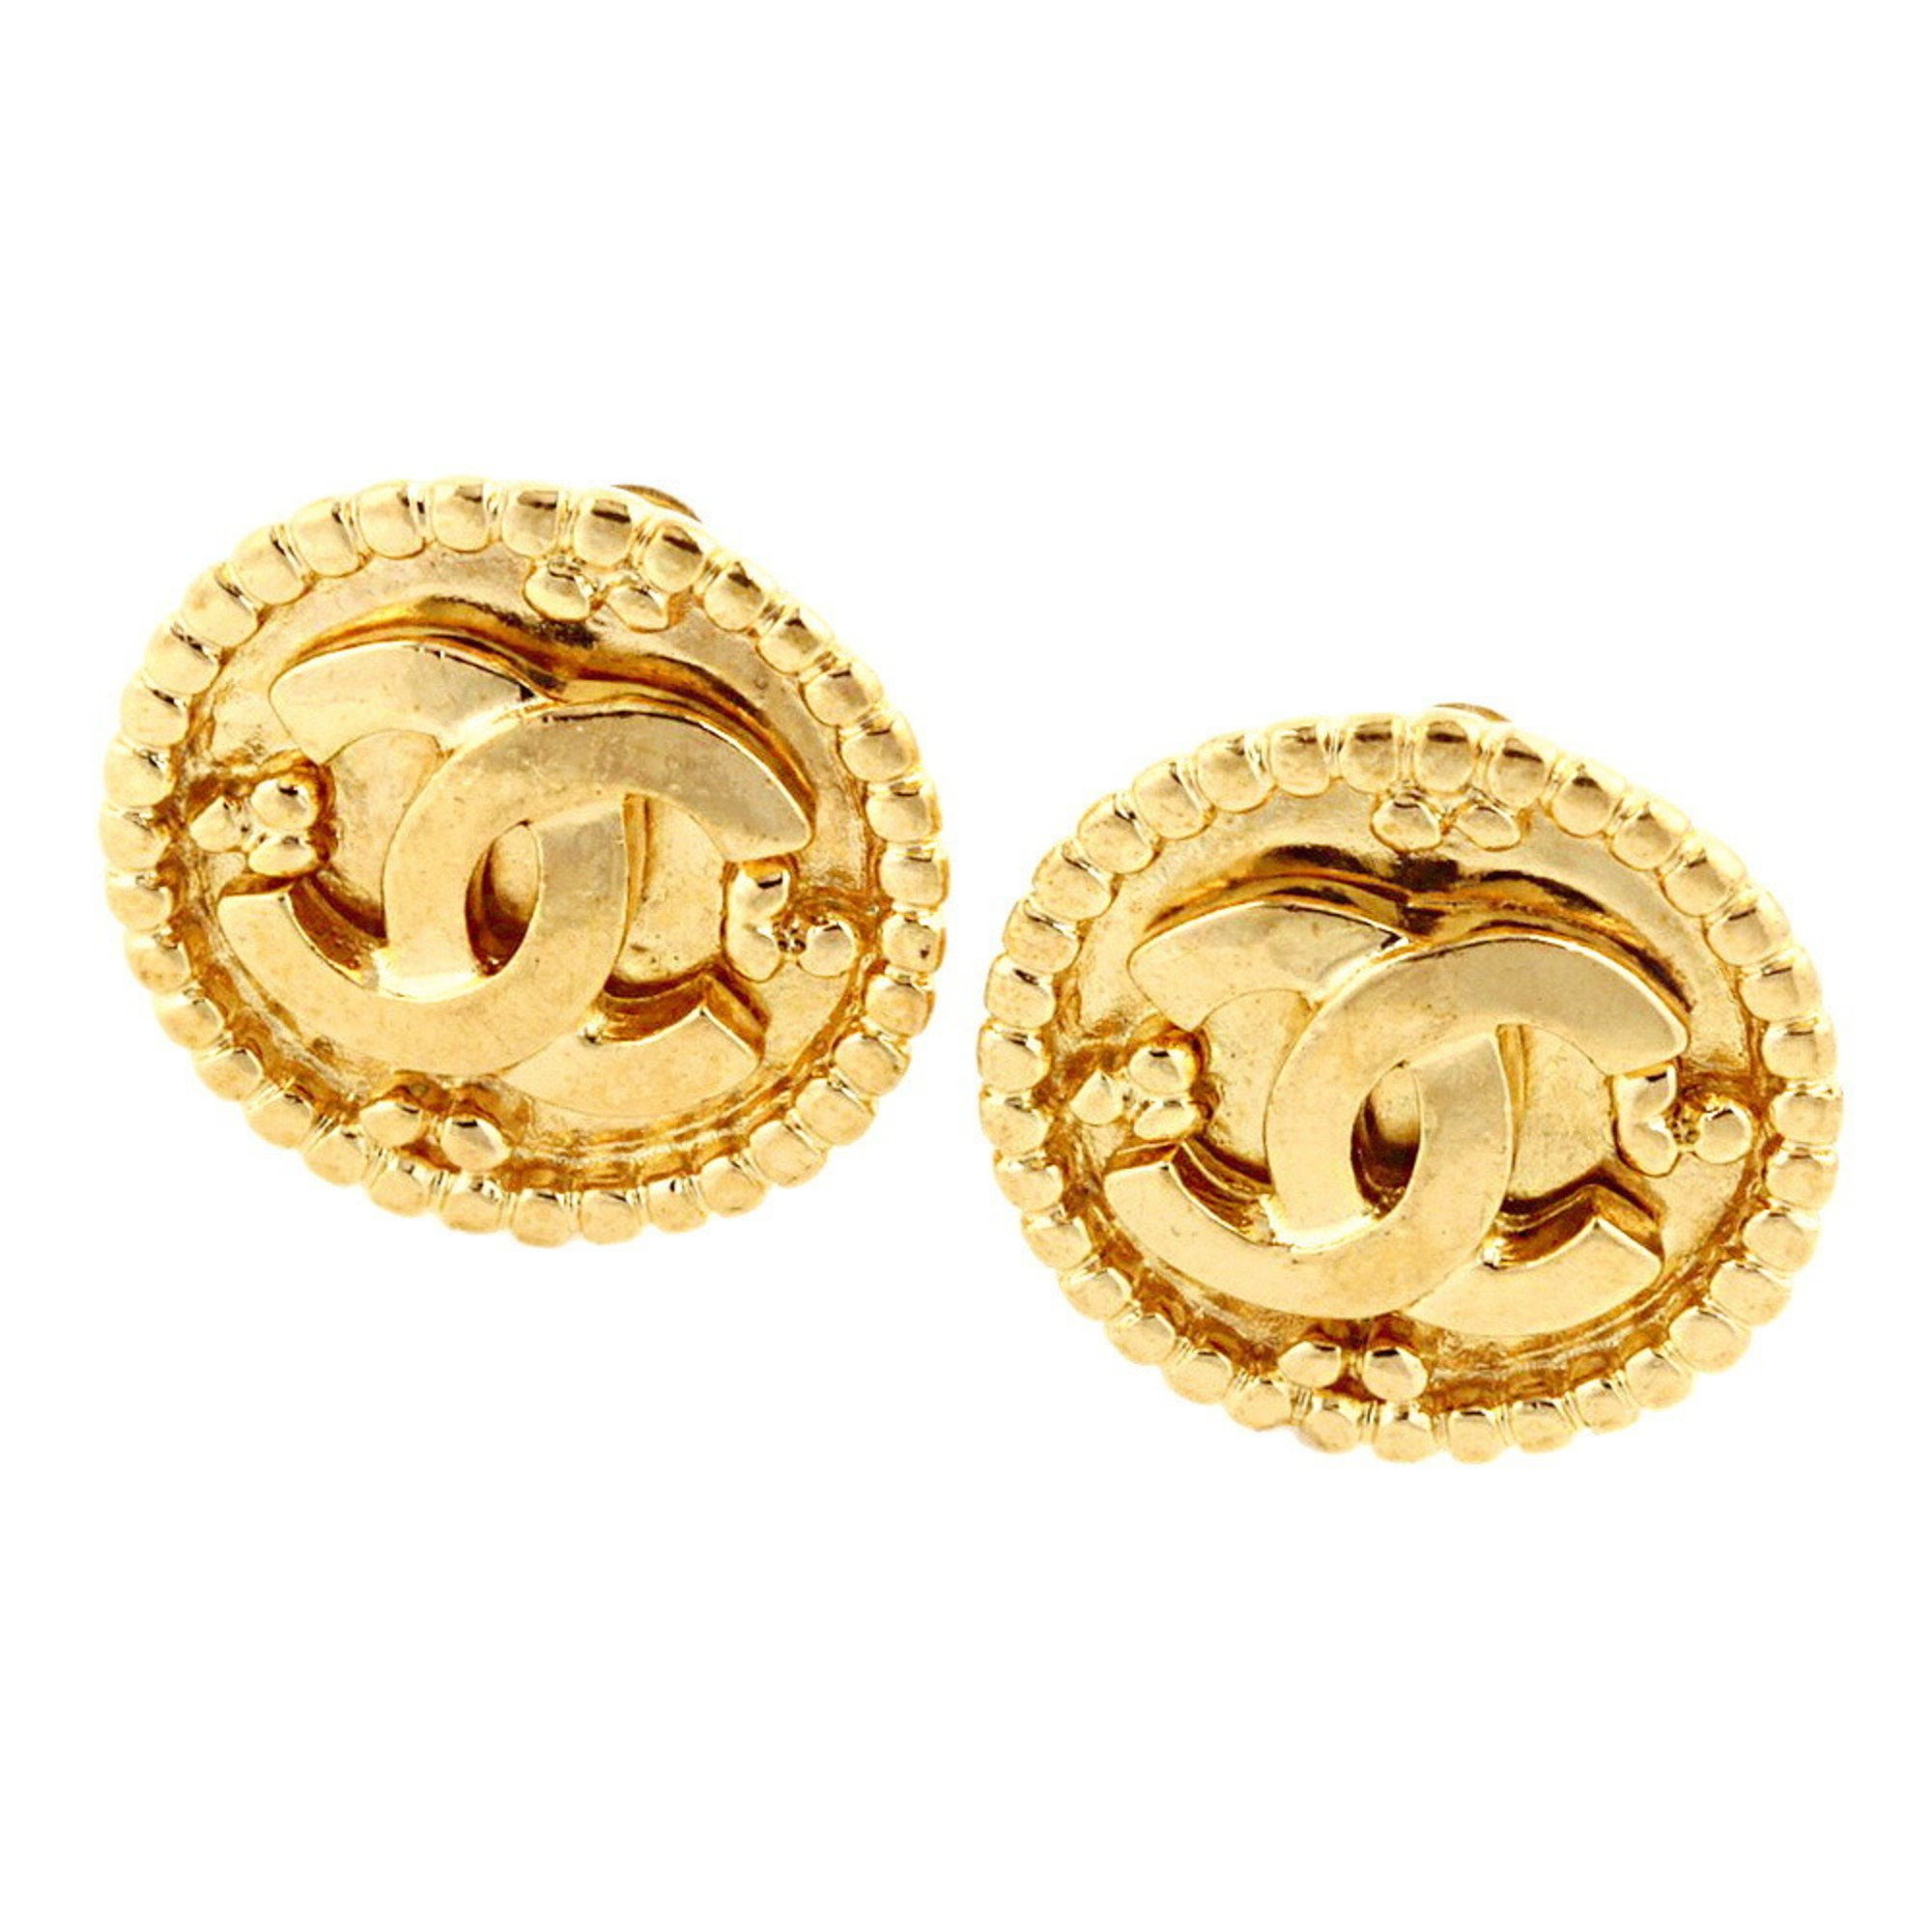 Chanel CHANEL here mark logo earrings antique vintage 96A